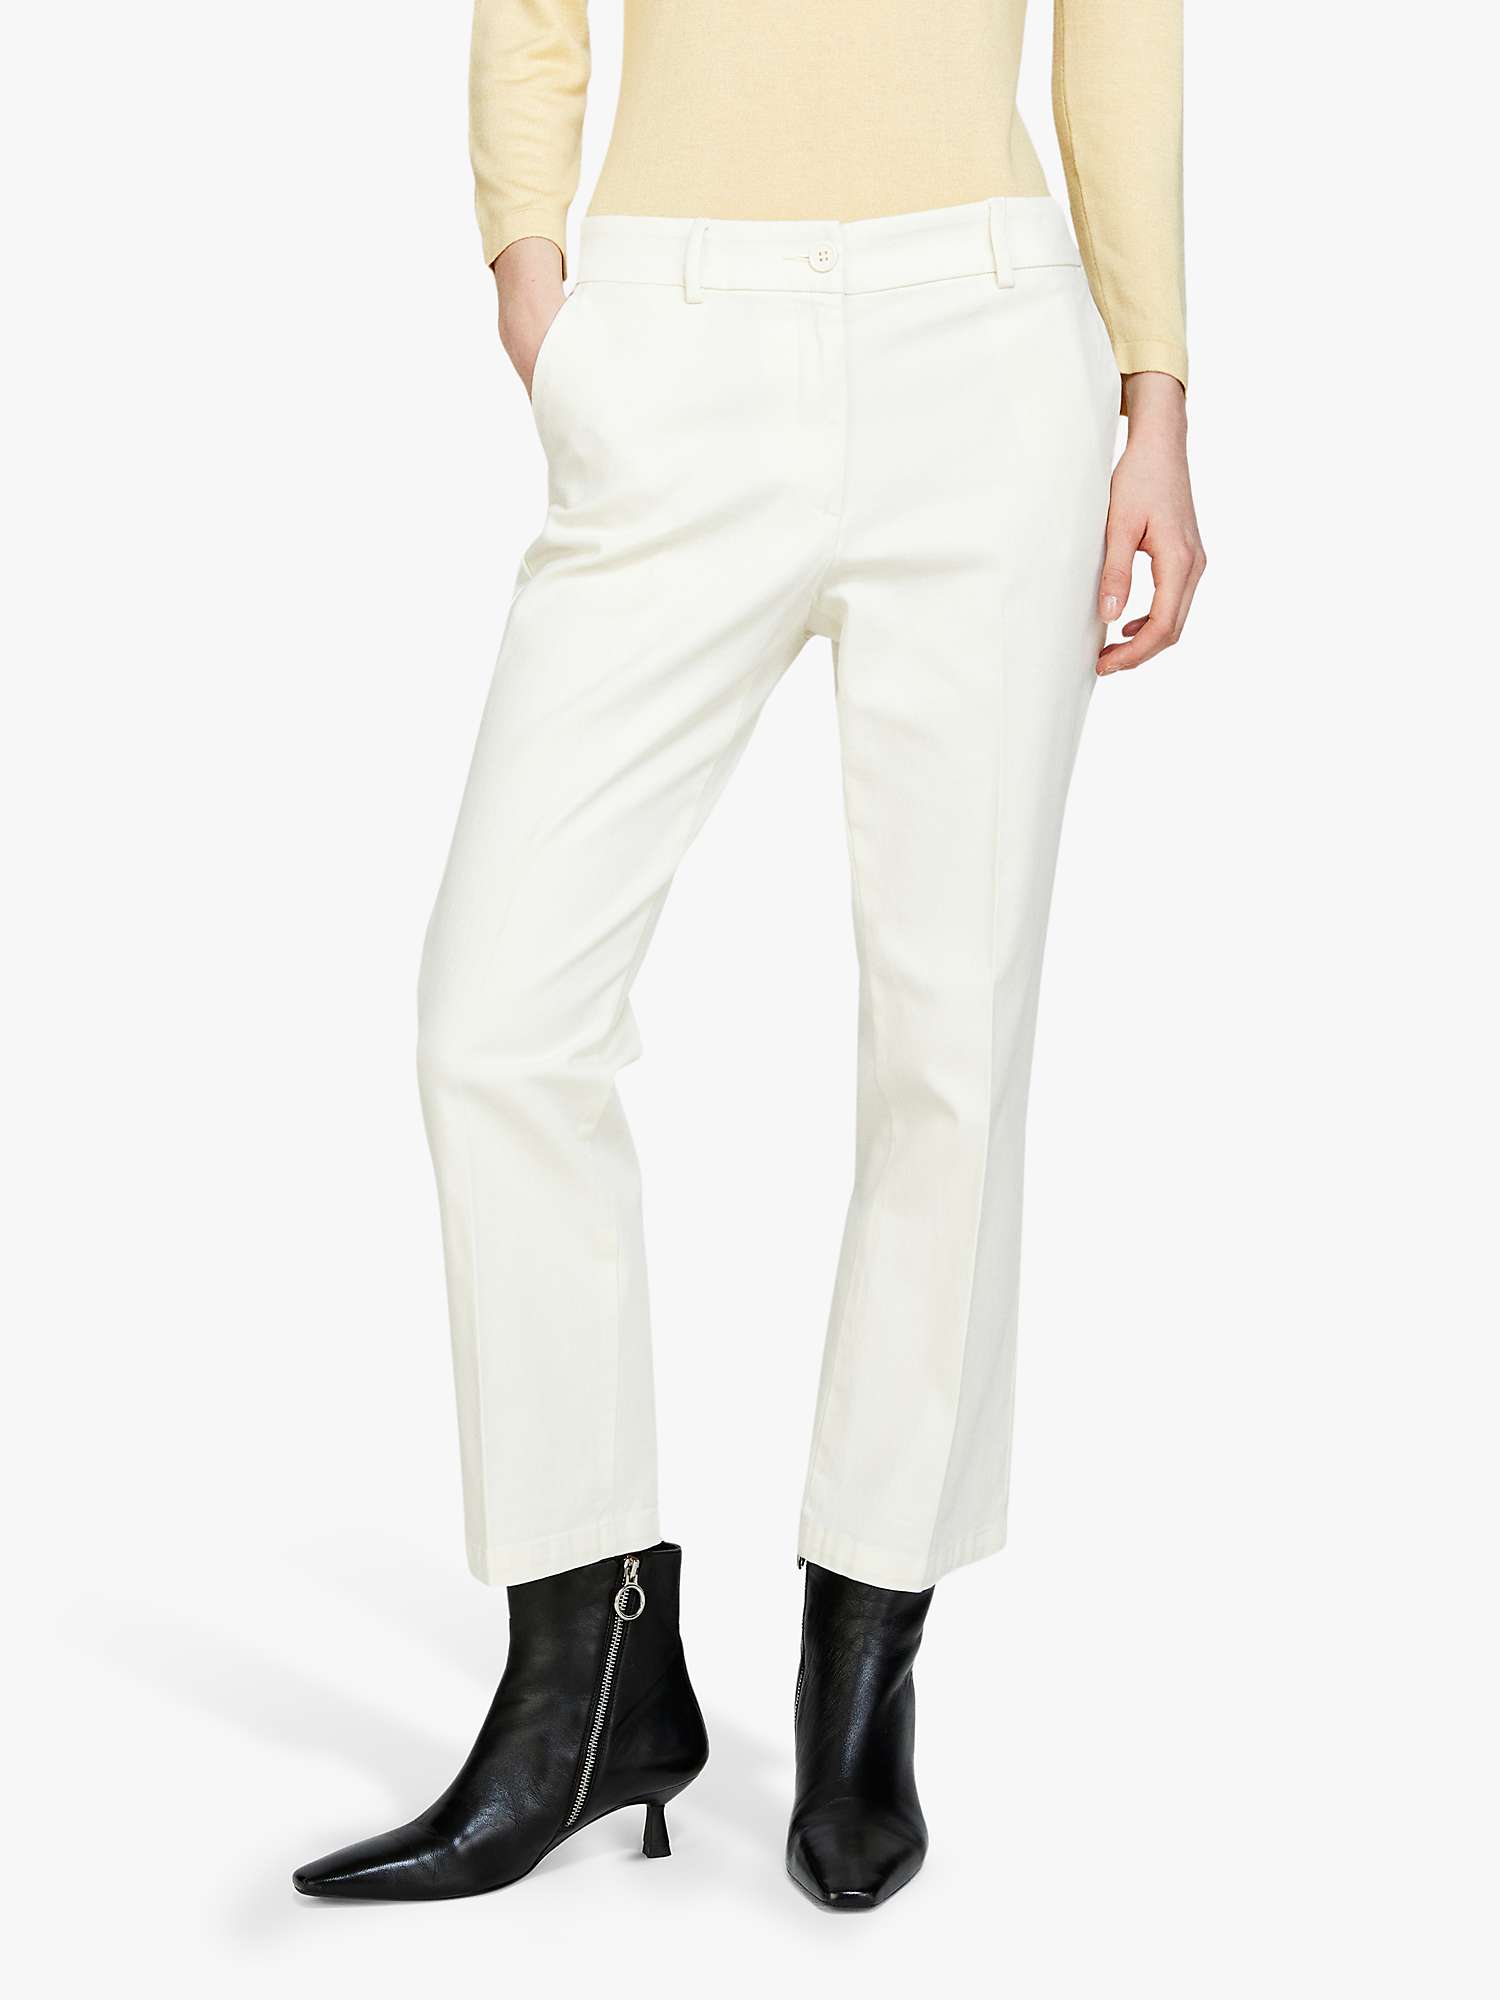 Buy SISLEY Plain Tailored Cropped Trousers, Cream Online at johnlewis.com